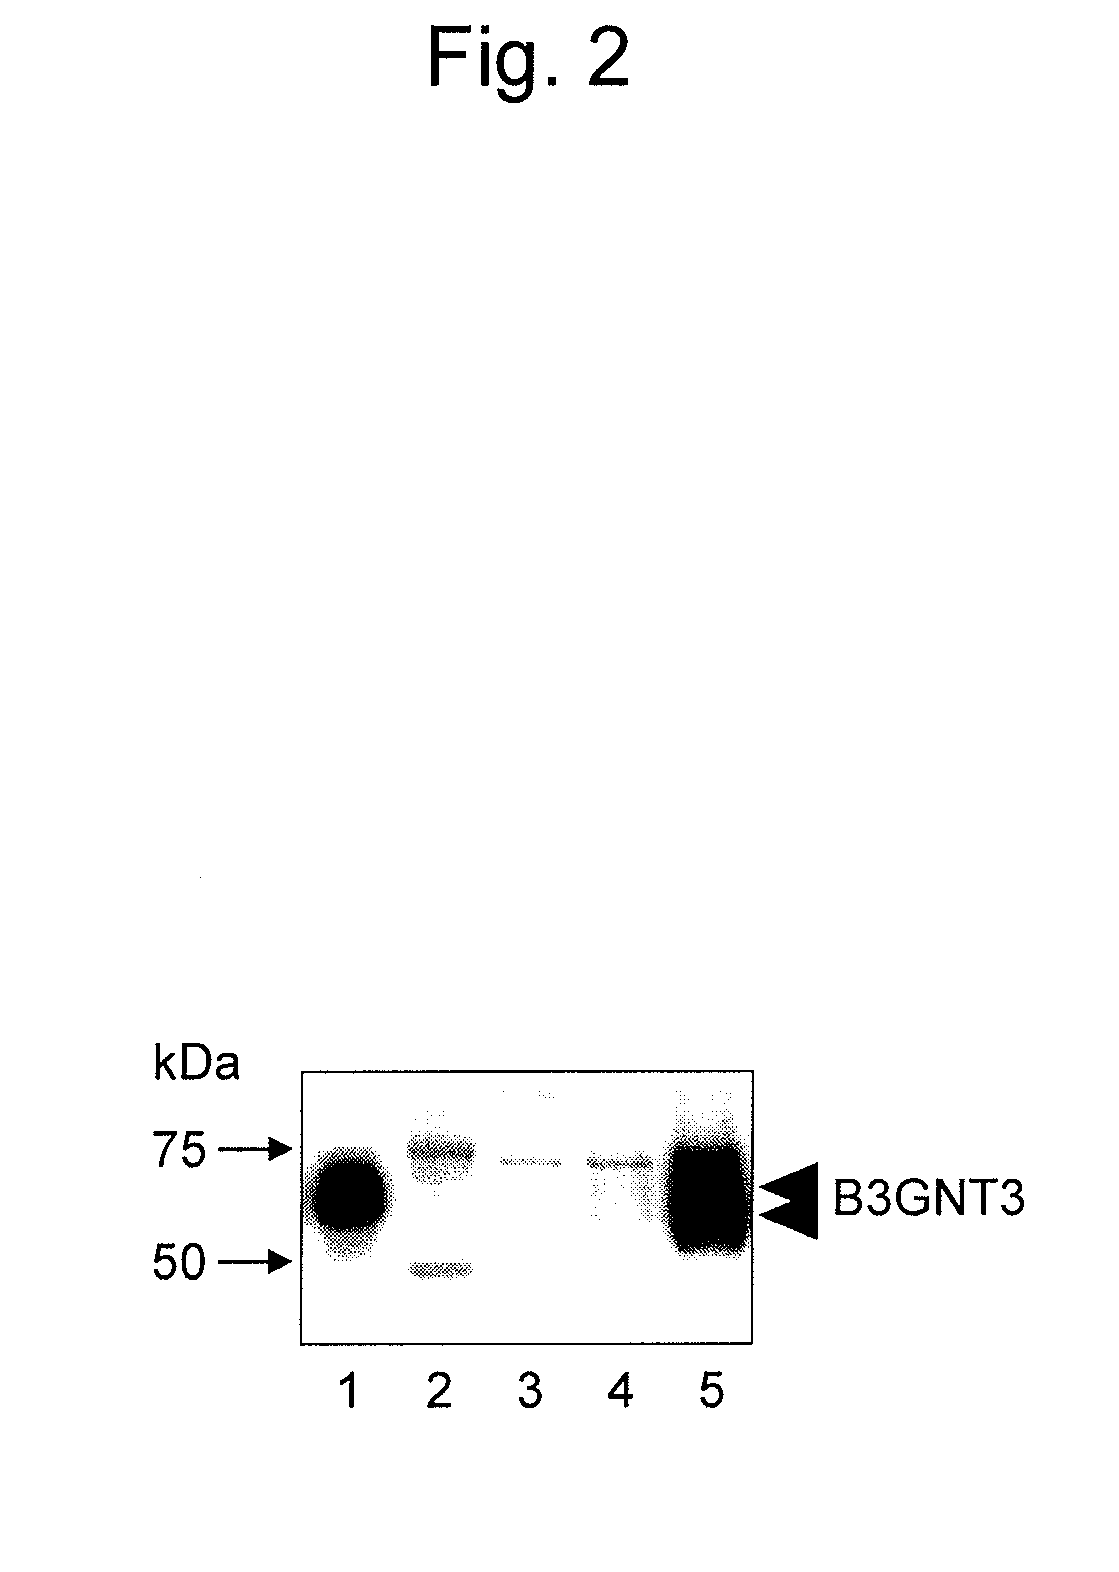 Antibody for detecting epithelial ovarian cancer marker and method for diagnosing epithelial ovarian cancer